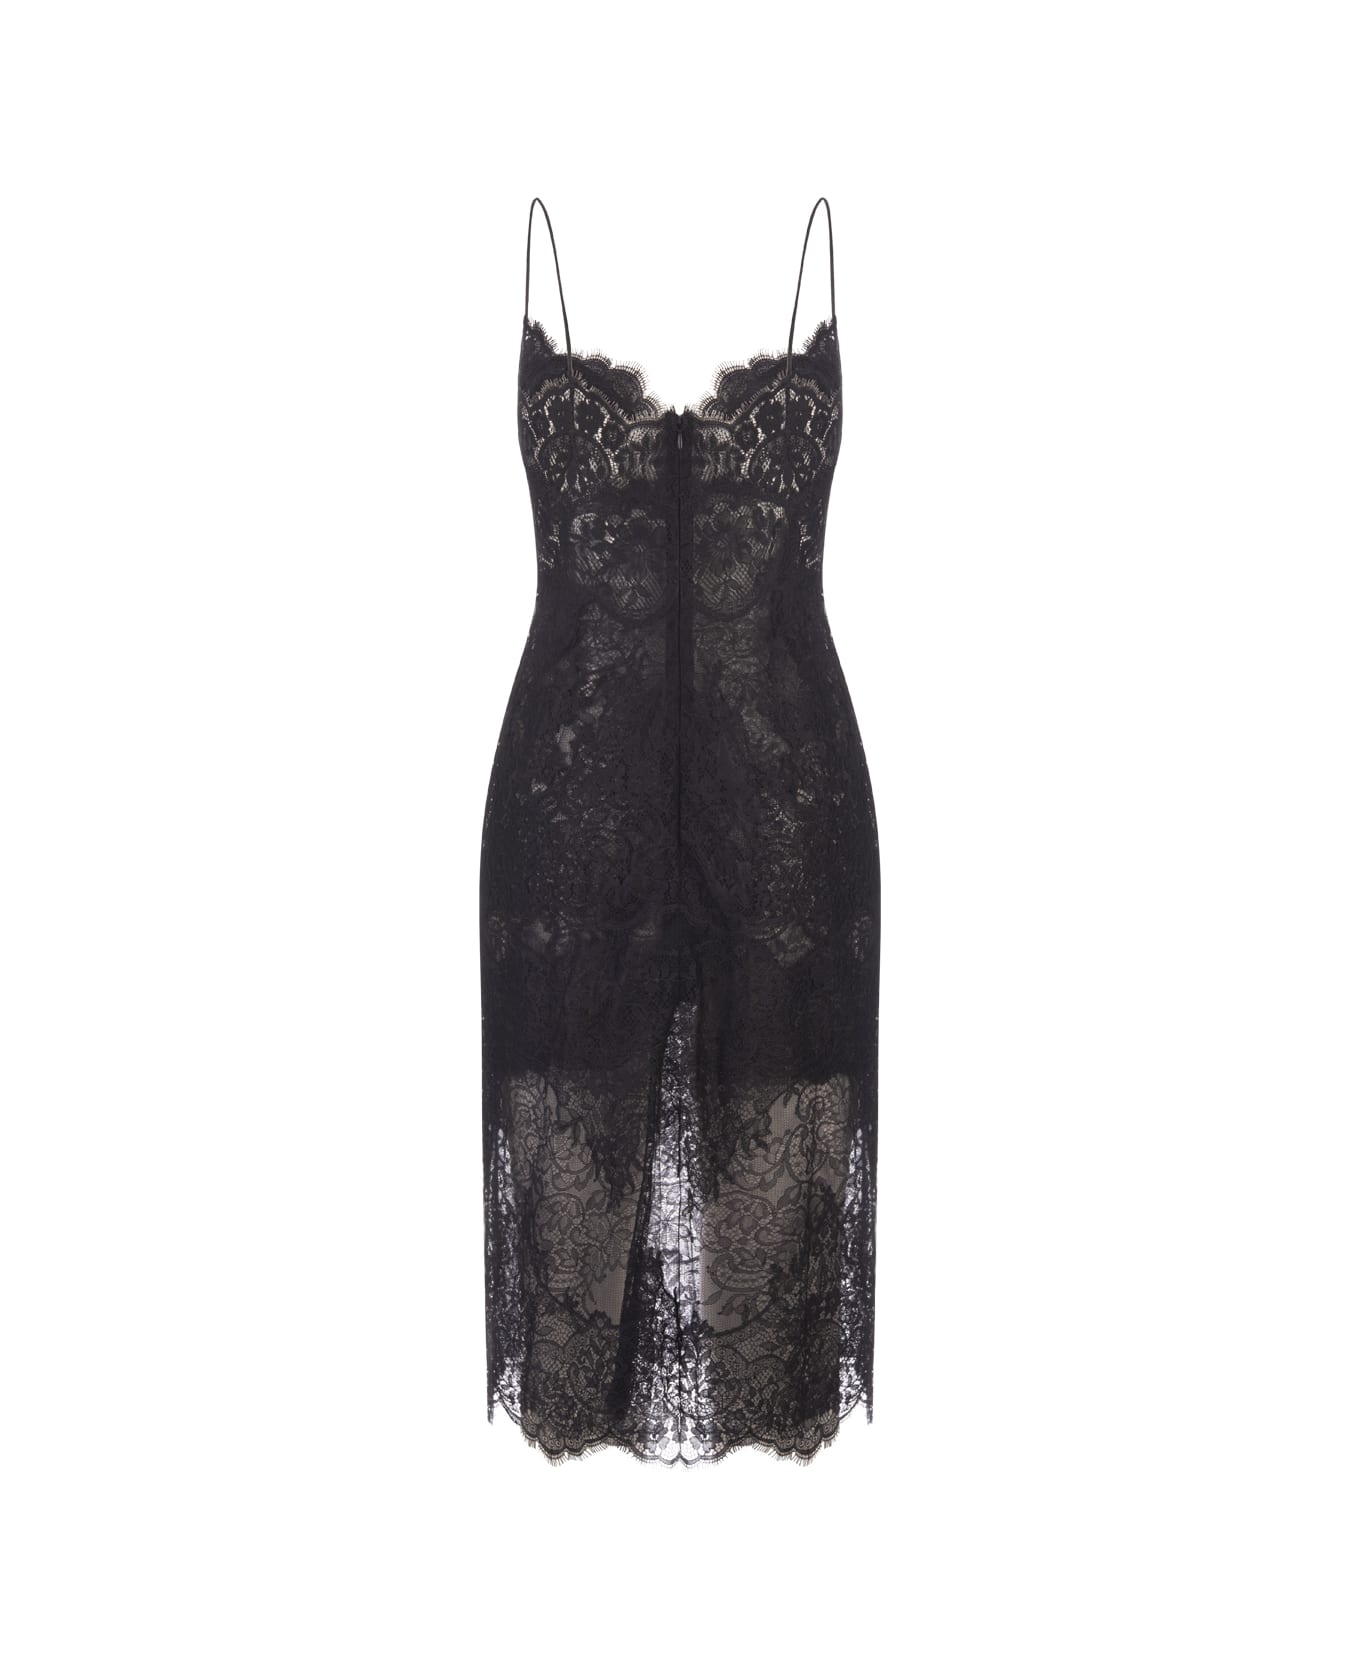 Ermanno Scervino All-over Black Lace Lingerie Dress - Black ランジェリー＆パジャマ